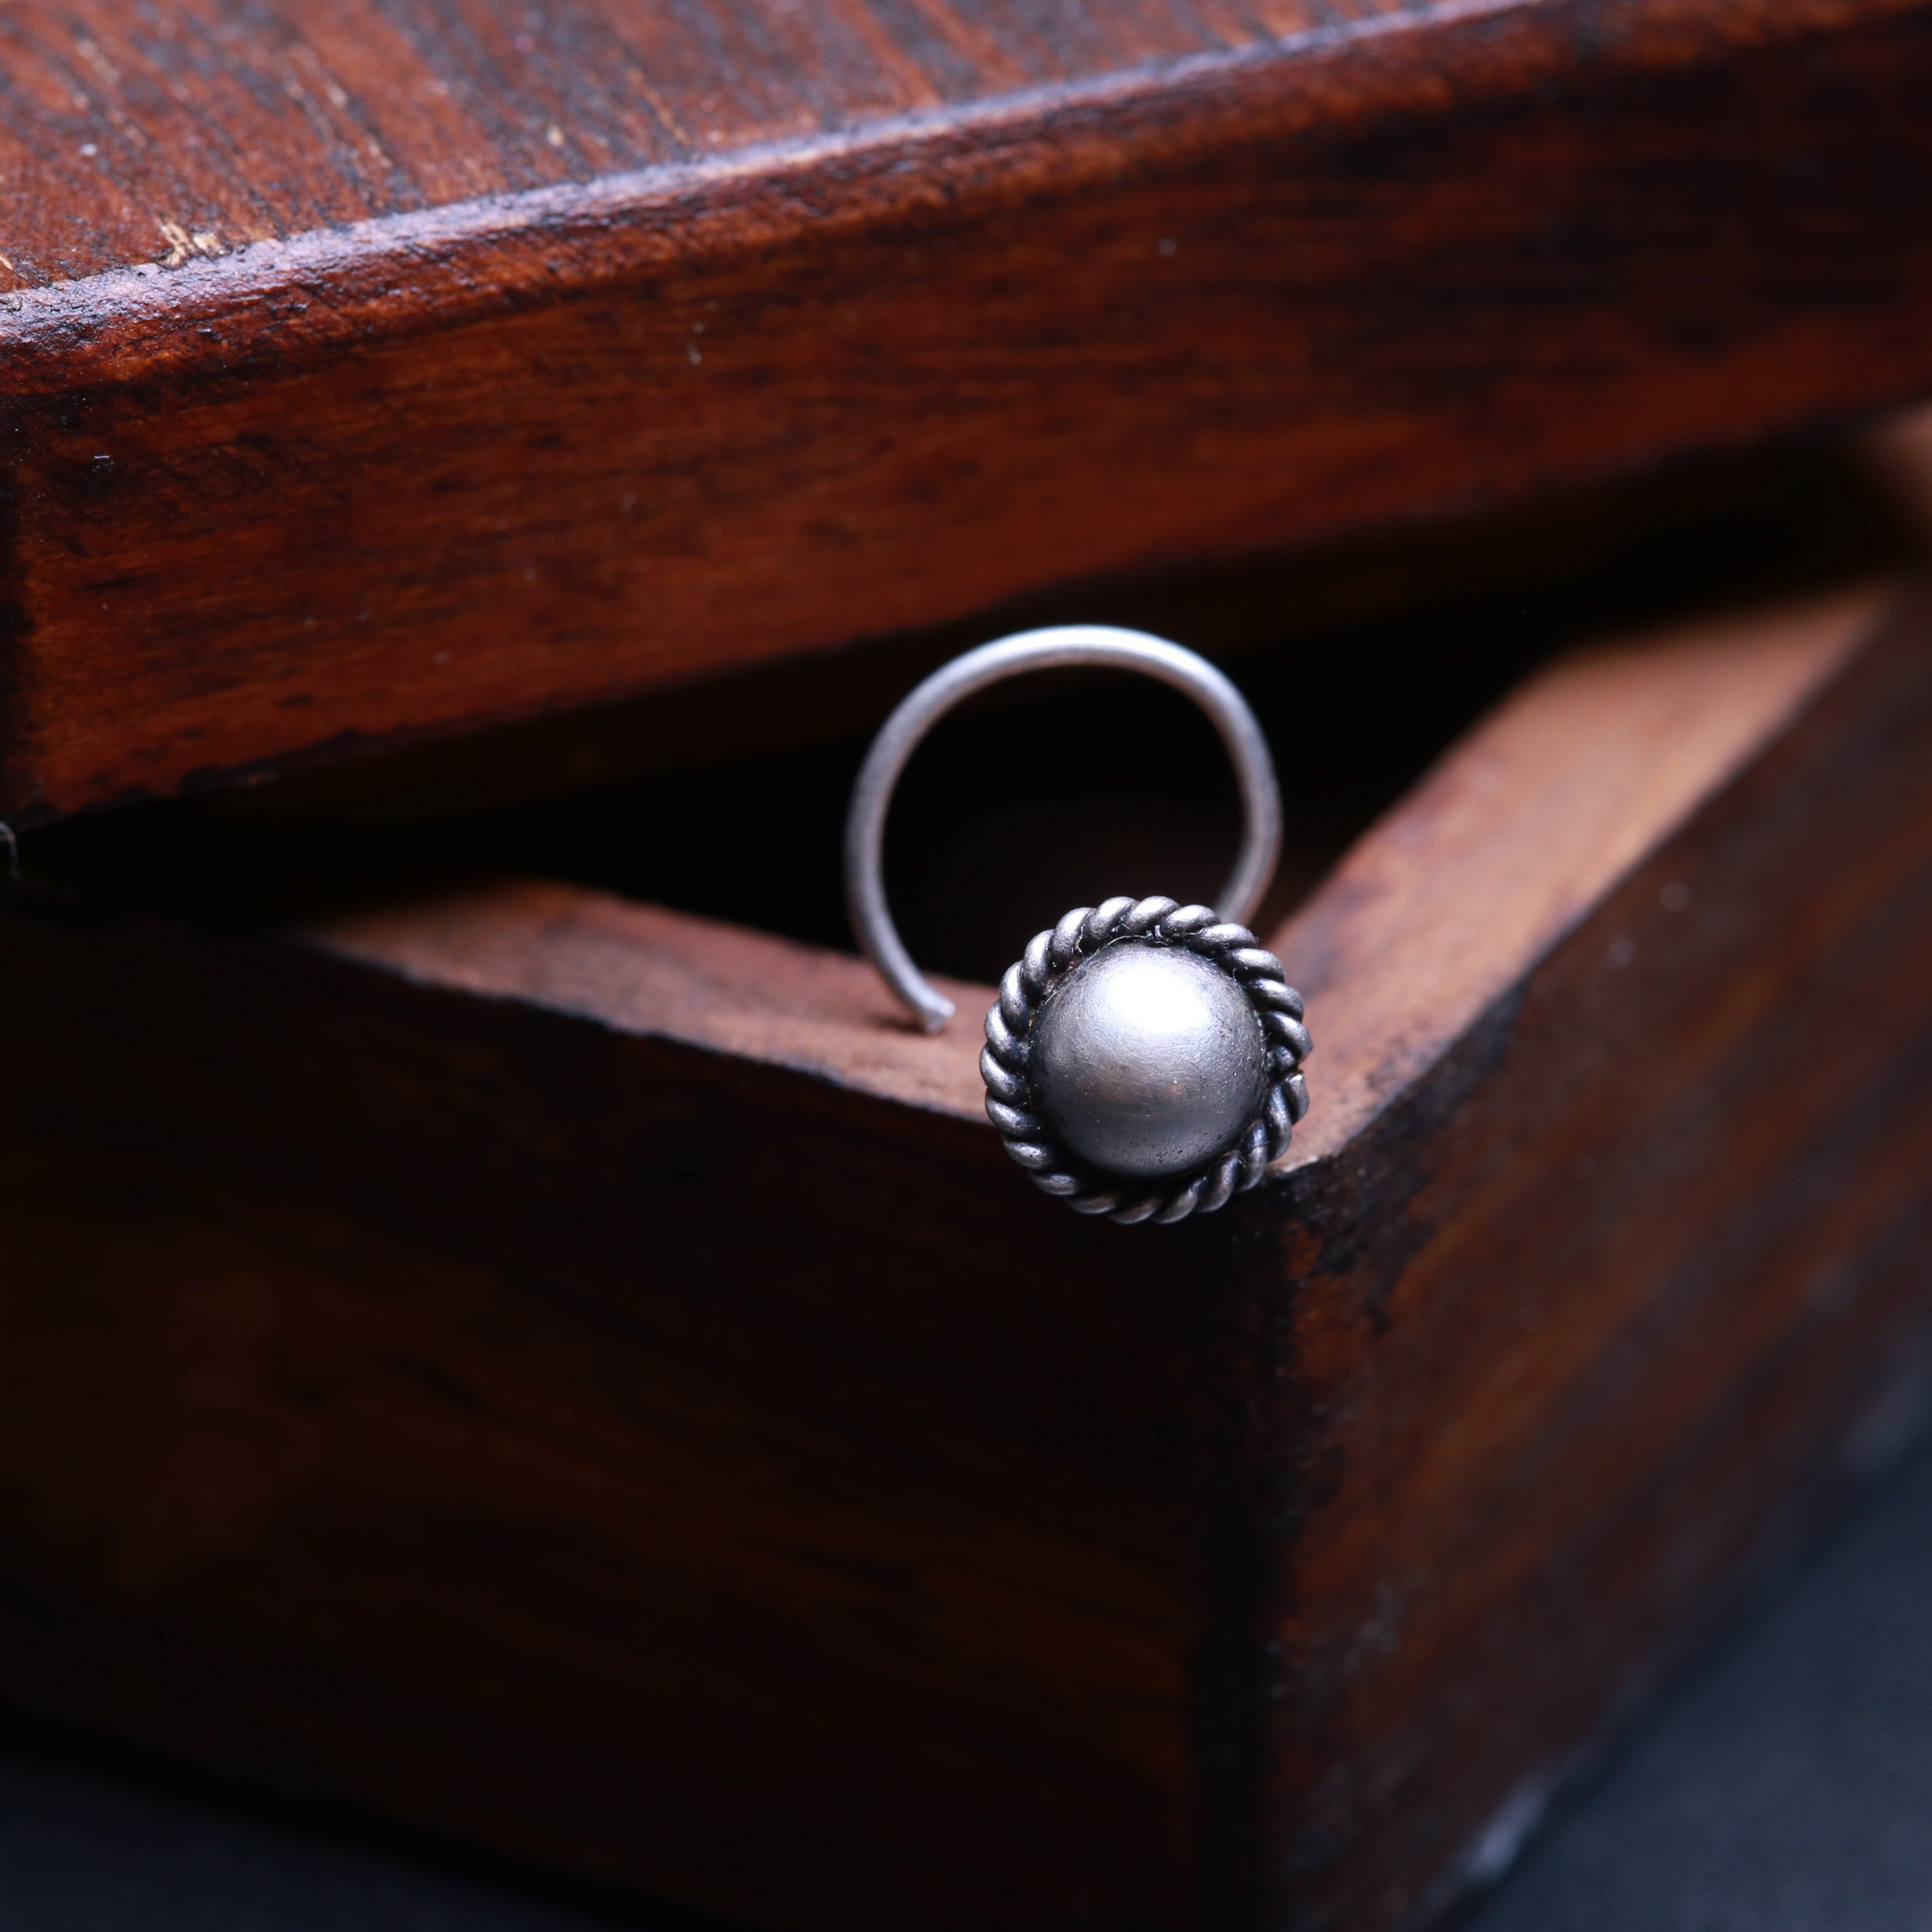 Sphere Nose Pin (Pierced)